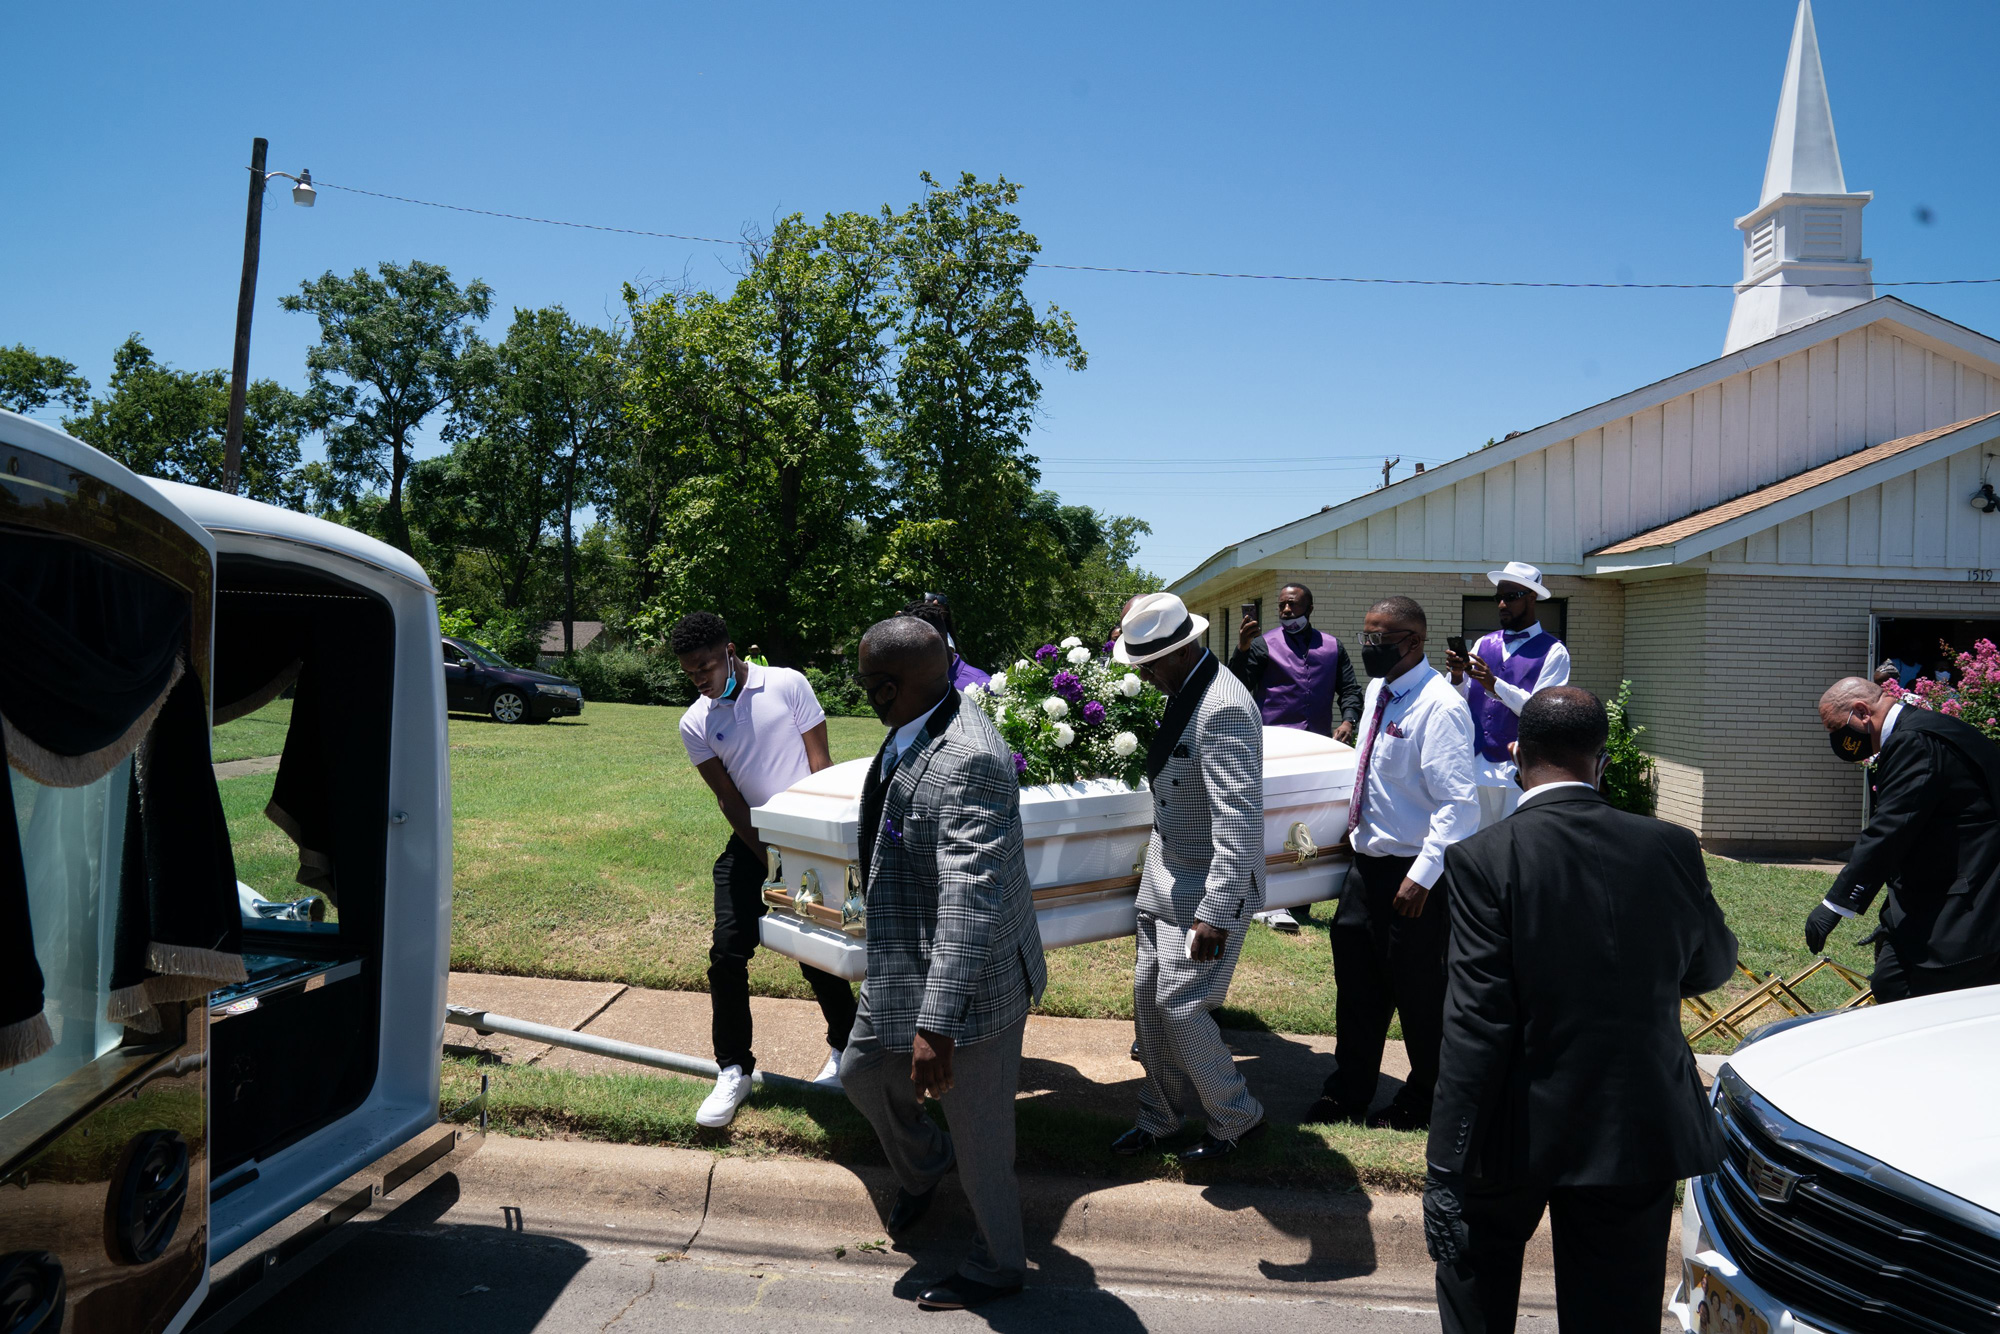 A casket carrying the body of Lola M. Simmons is placed into a hearse following the funeral service at the Denley Drive Missionary Baptist Church in Dallas, Texas on July 30.